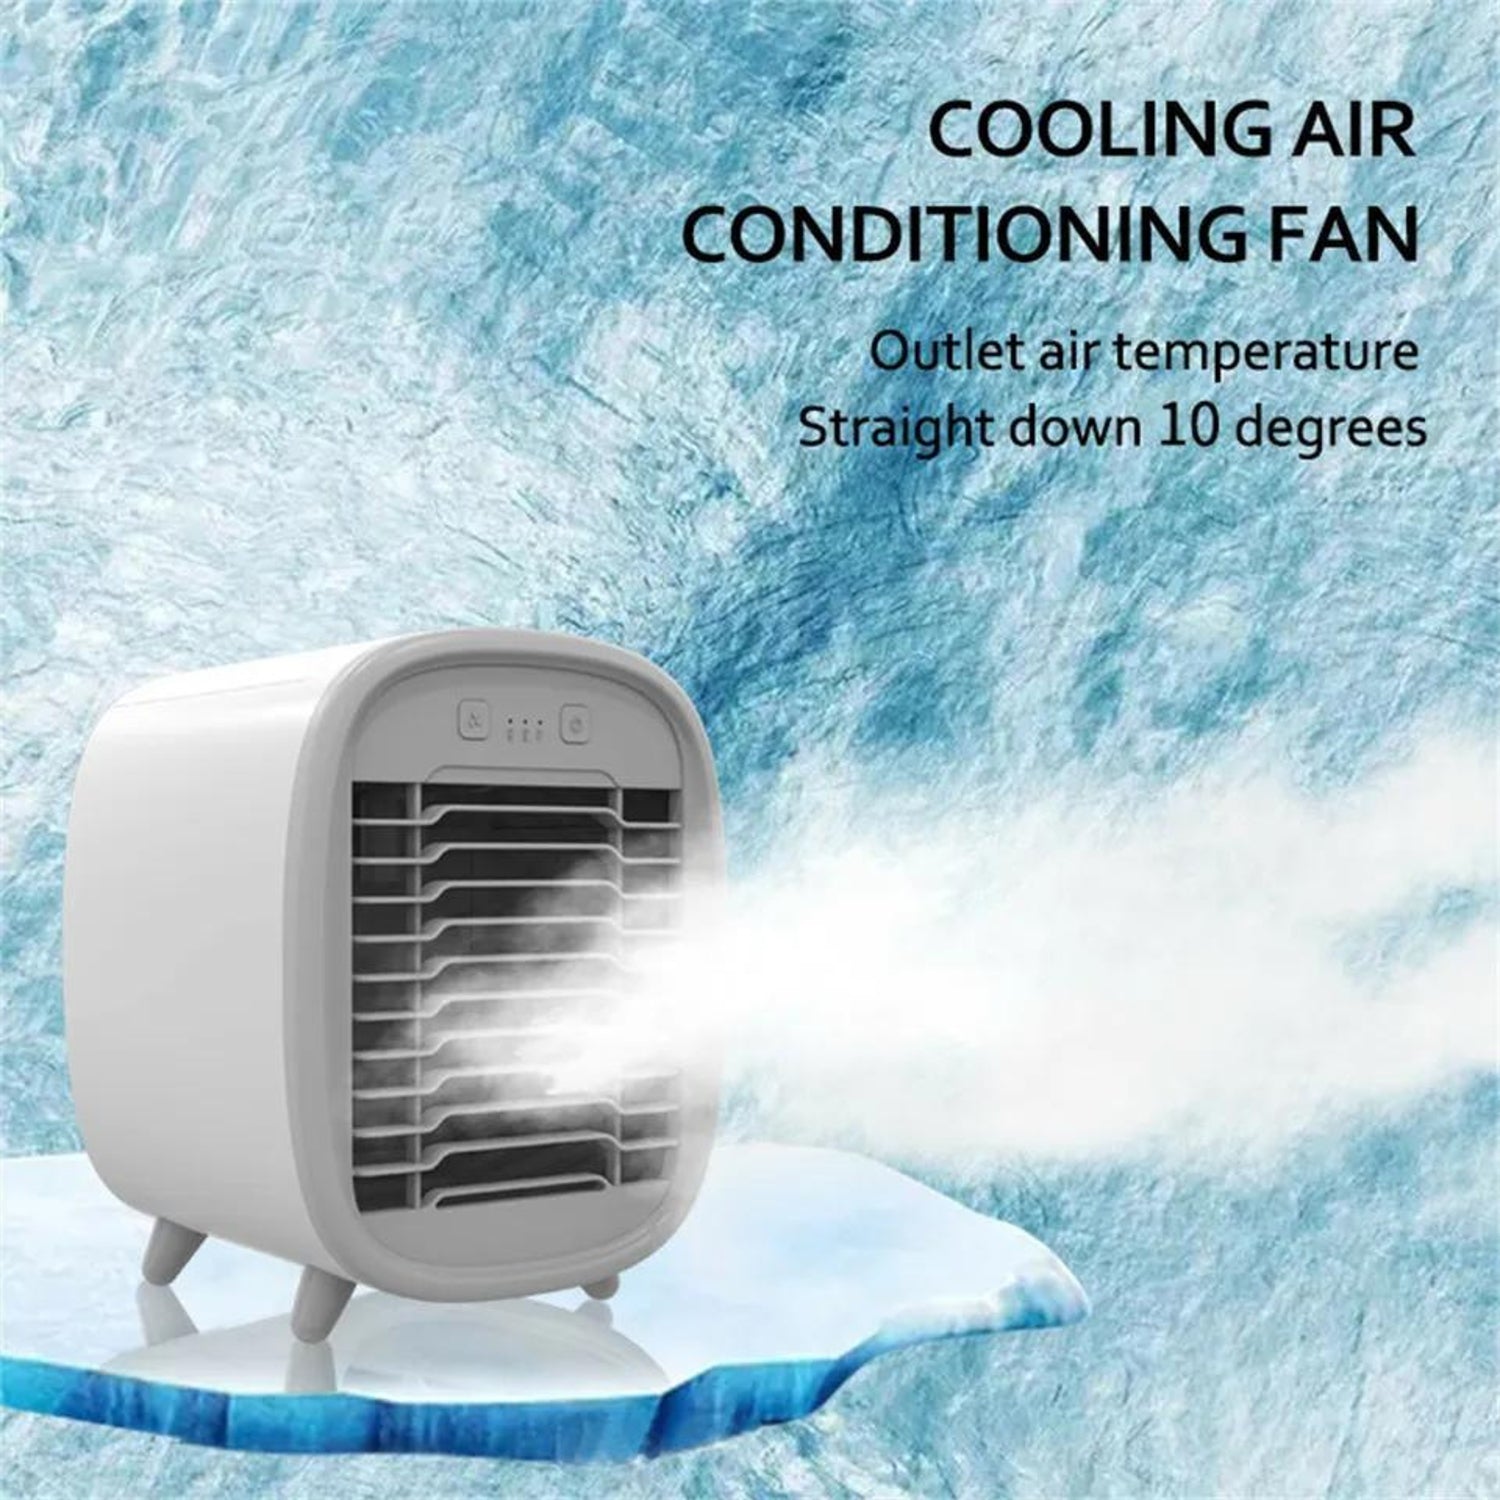 12623 Portable Air Cooler-Rechargeable Personal with Duration Desk Cooling Fan USB Powered Desk PC Laptop Air Conditioner Cooler for Home, Bedroom, Travel, and Office (1 Pc)